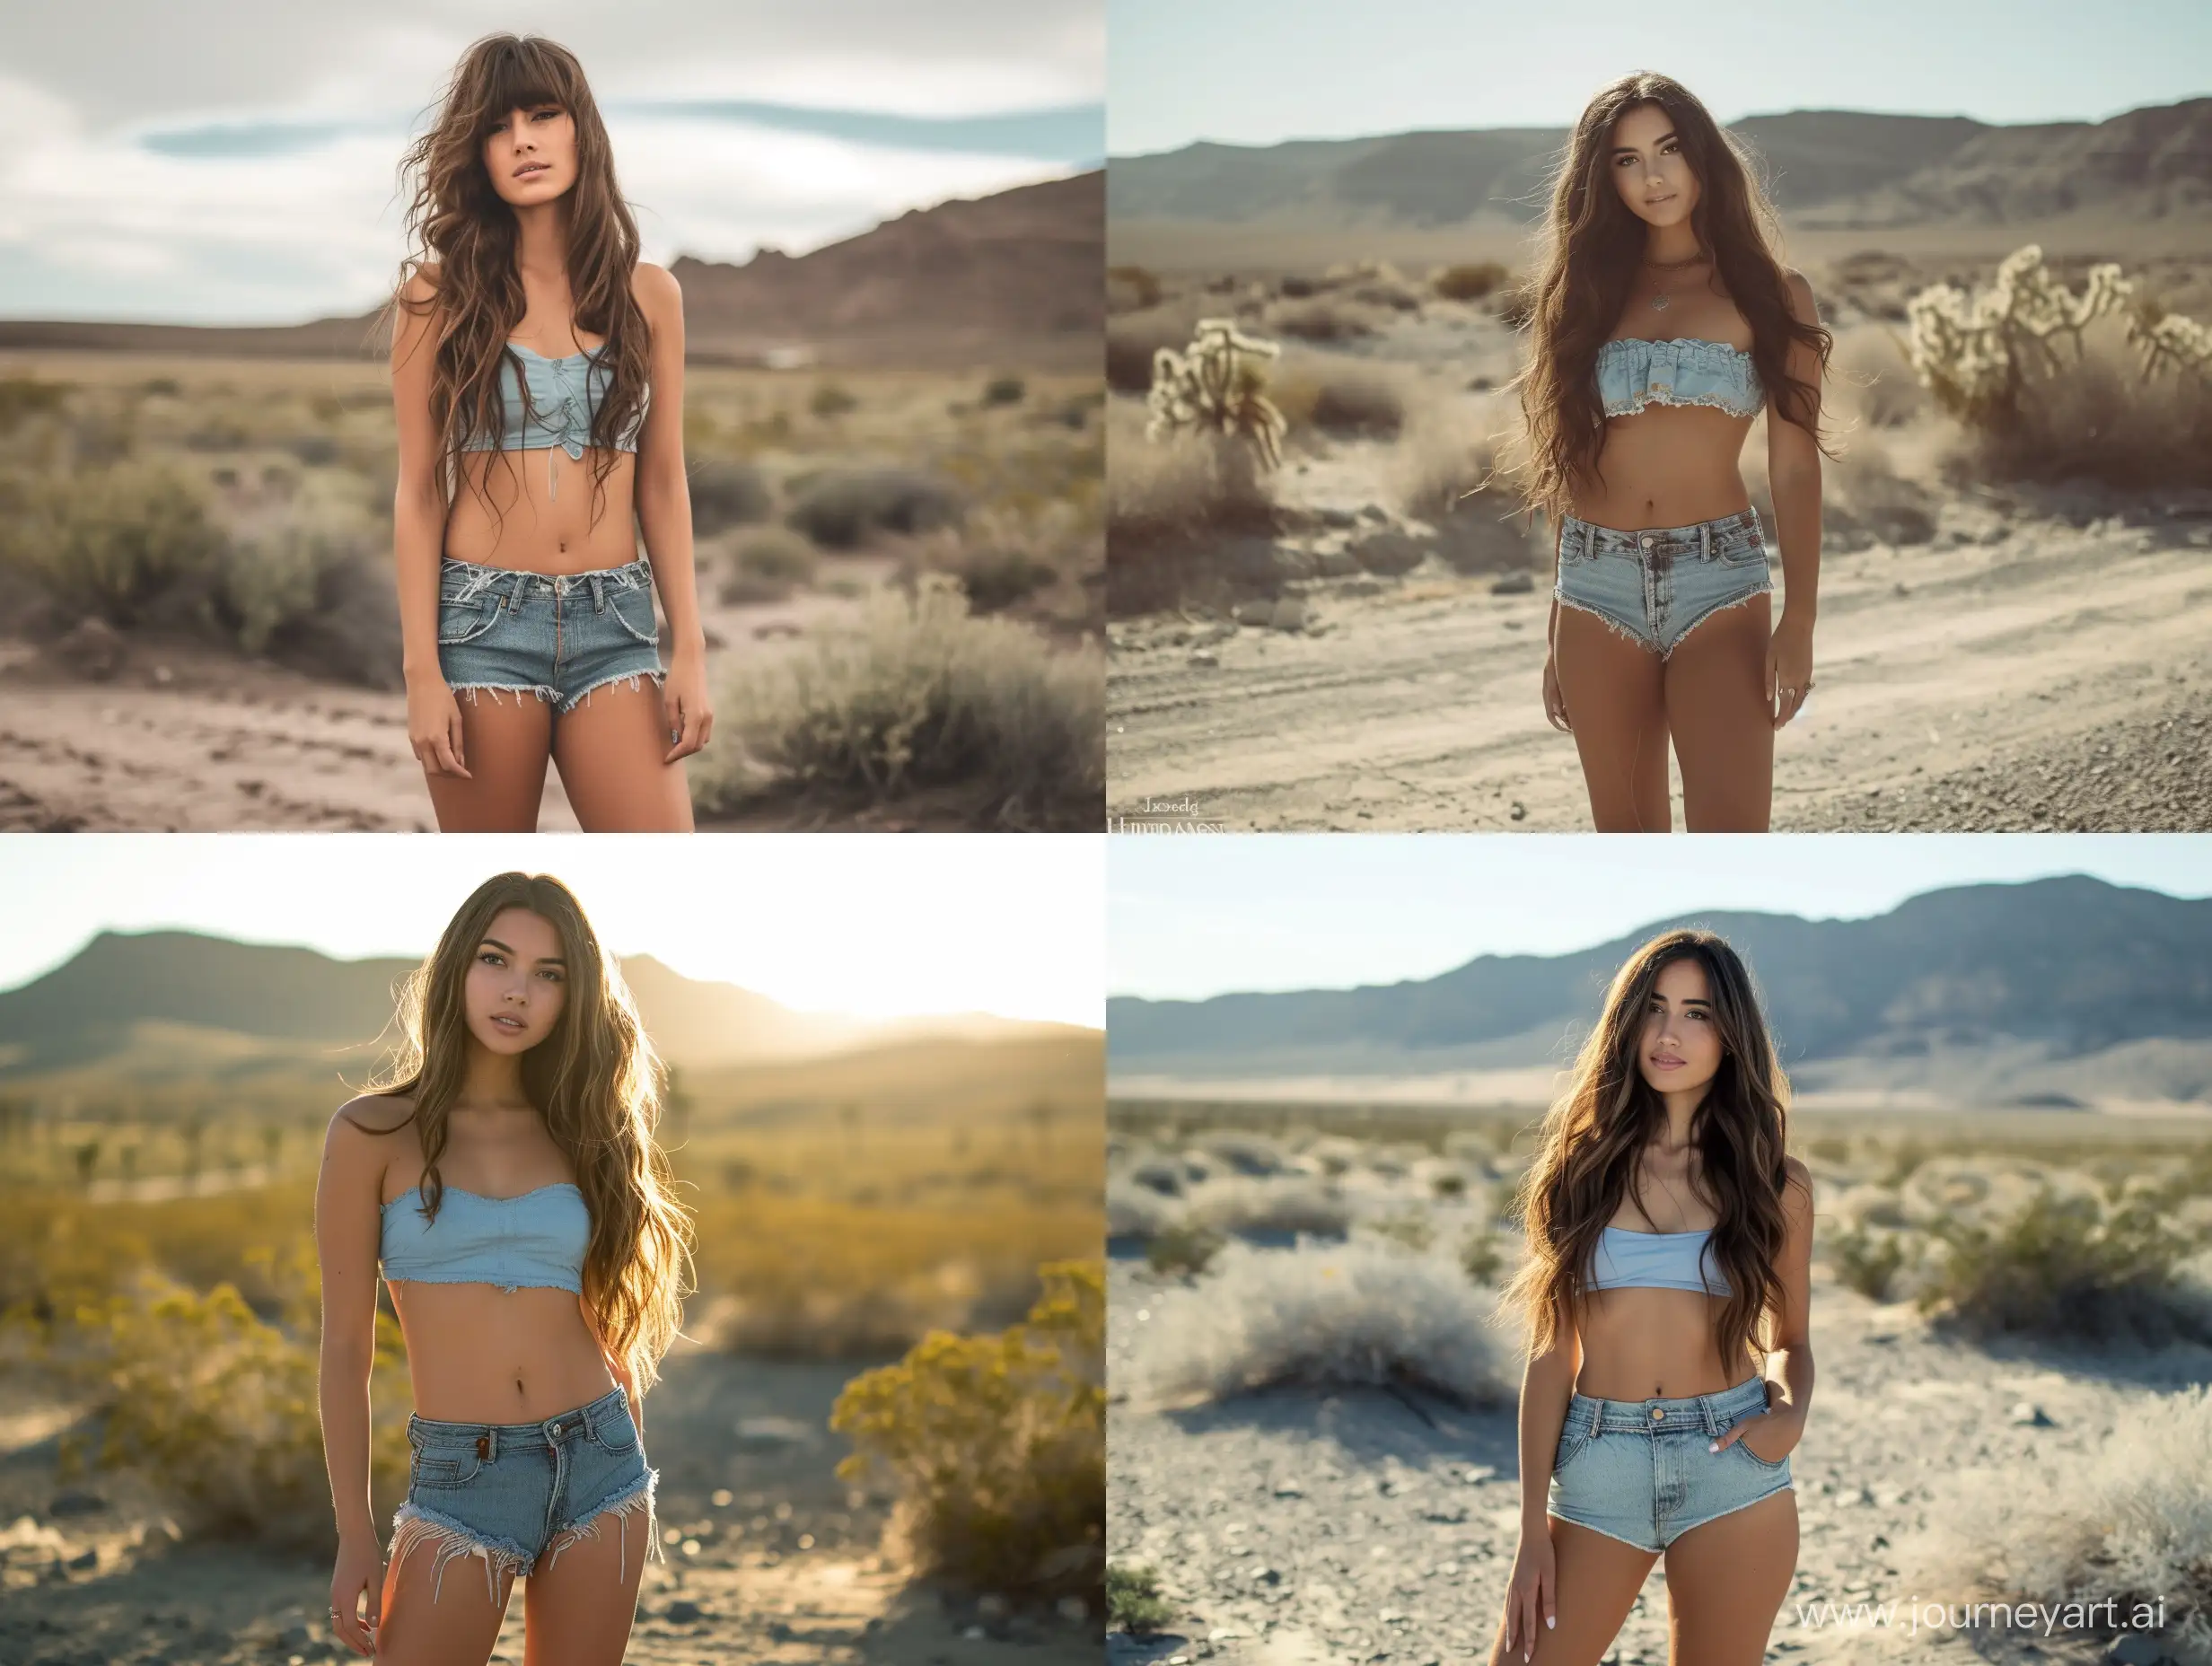 Graceful-Spanish-Woman-in-Desert-Oasis-Stylish-Shorts-and-Blue-Top